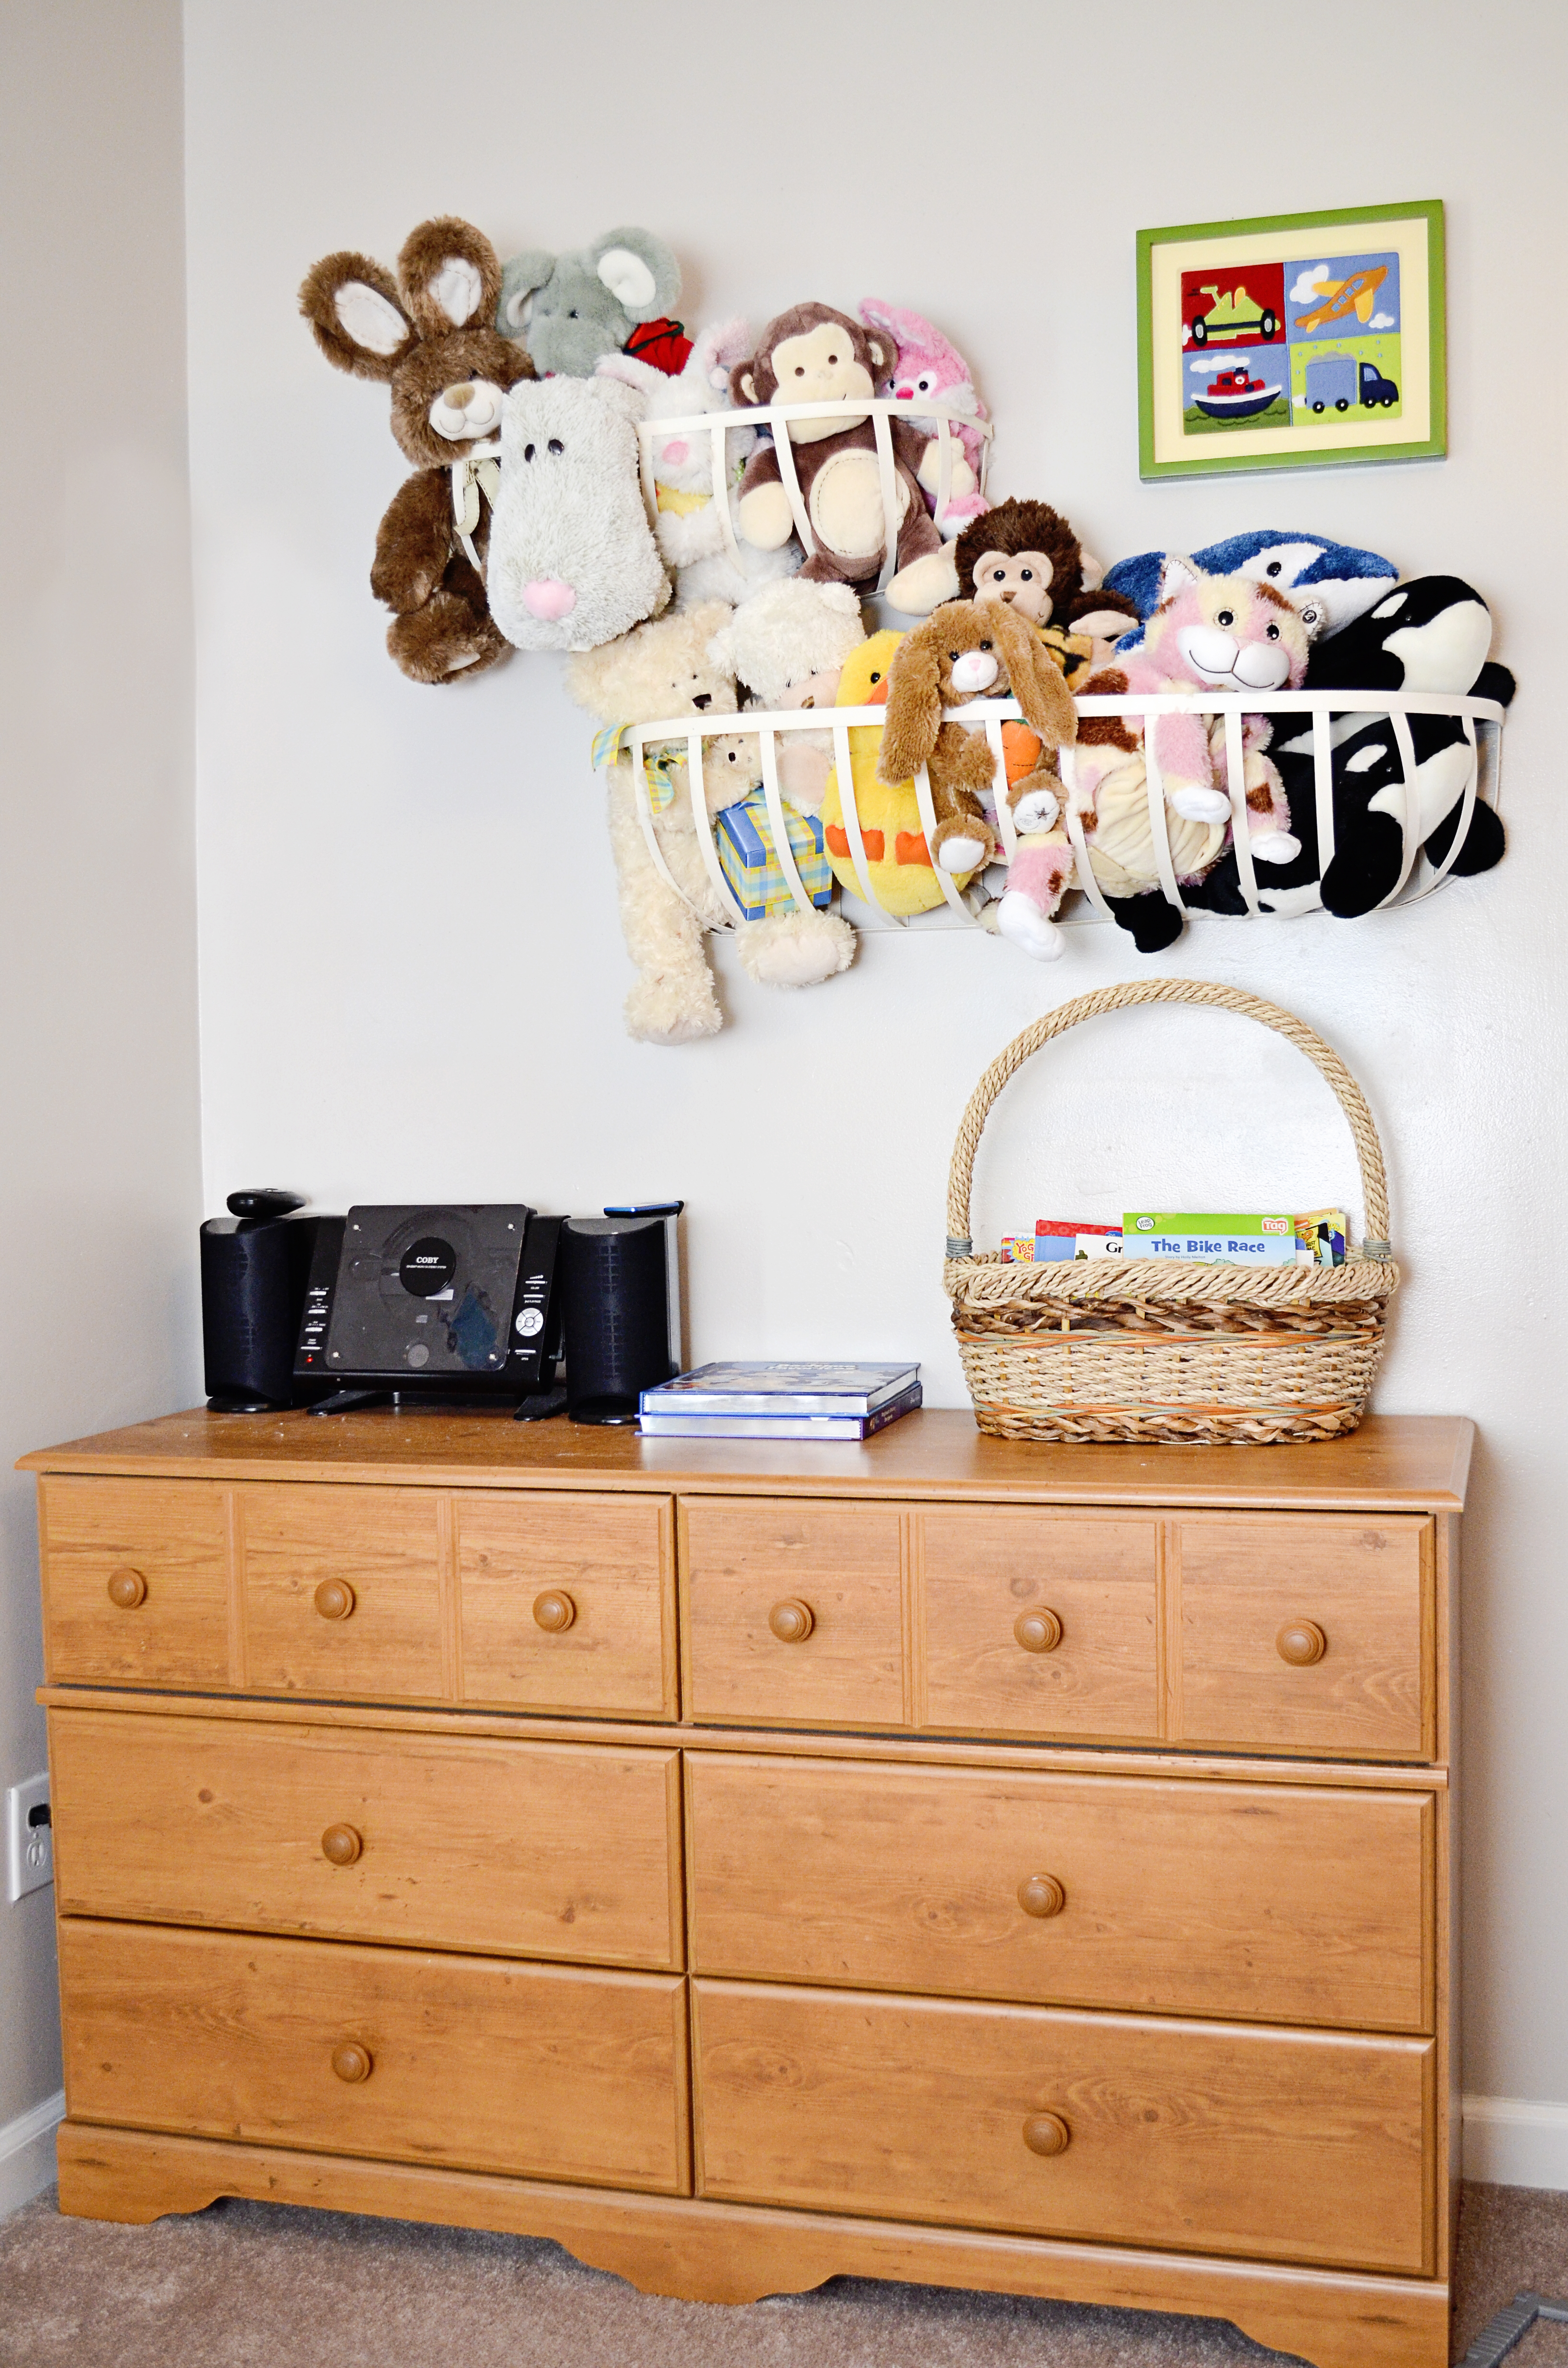 These Stuffed Animal Toy Storage Baskets are a creative and fun way to store your children's stuffed animals. Perfect for small spaces, it gets all of the toys off of beds and the floor.